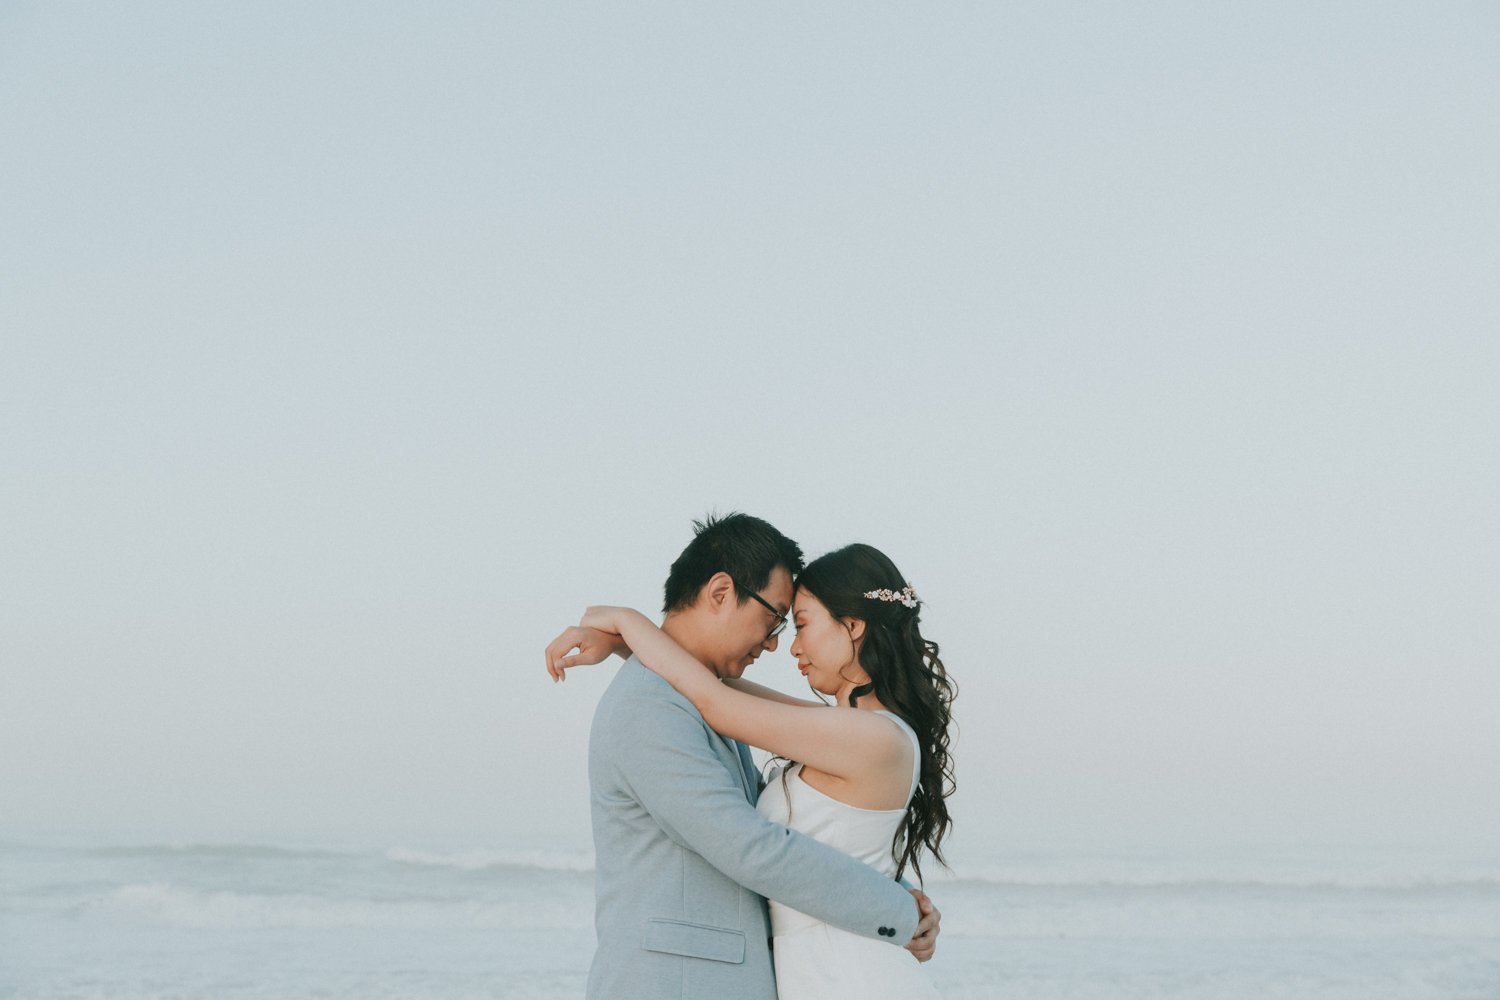 Wedding Shoot in Cape Town - Bianca Asher Photography-14.jpg